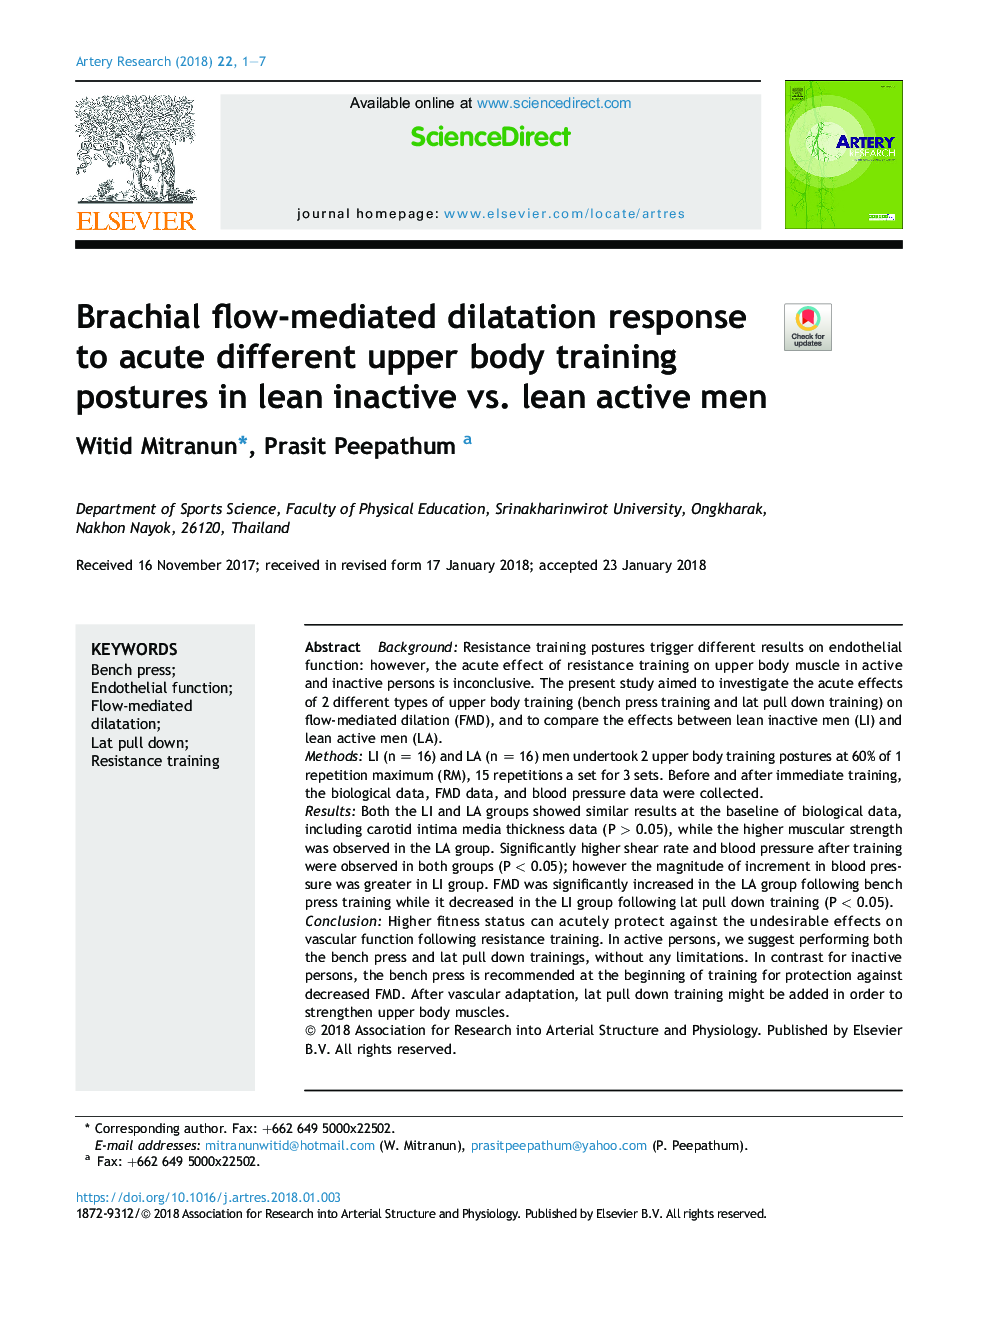 Brachial flow-mediated dilatation response to acute different upper body training postures in lean inactive vs. lean active men